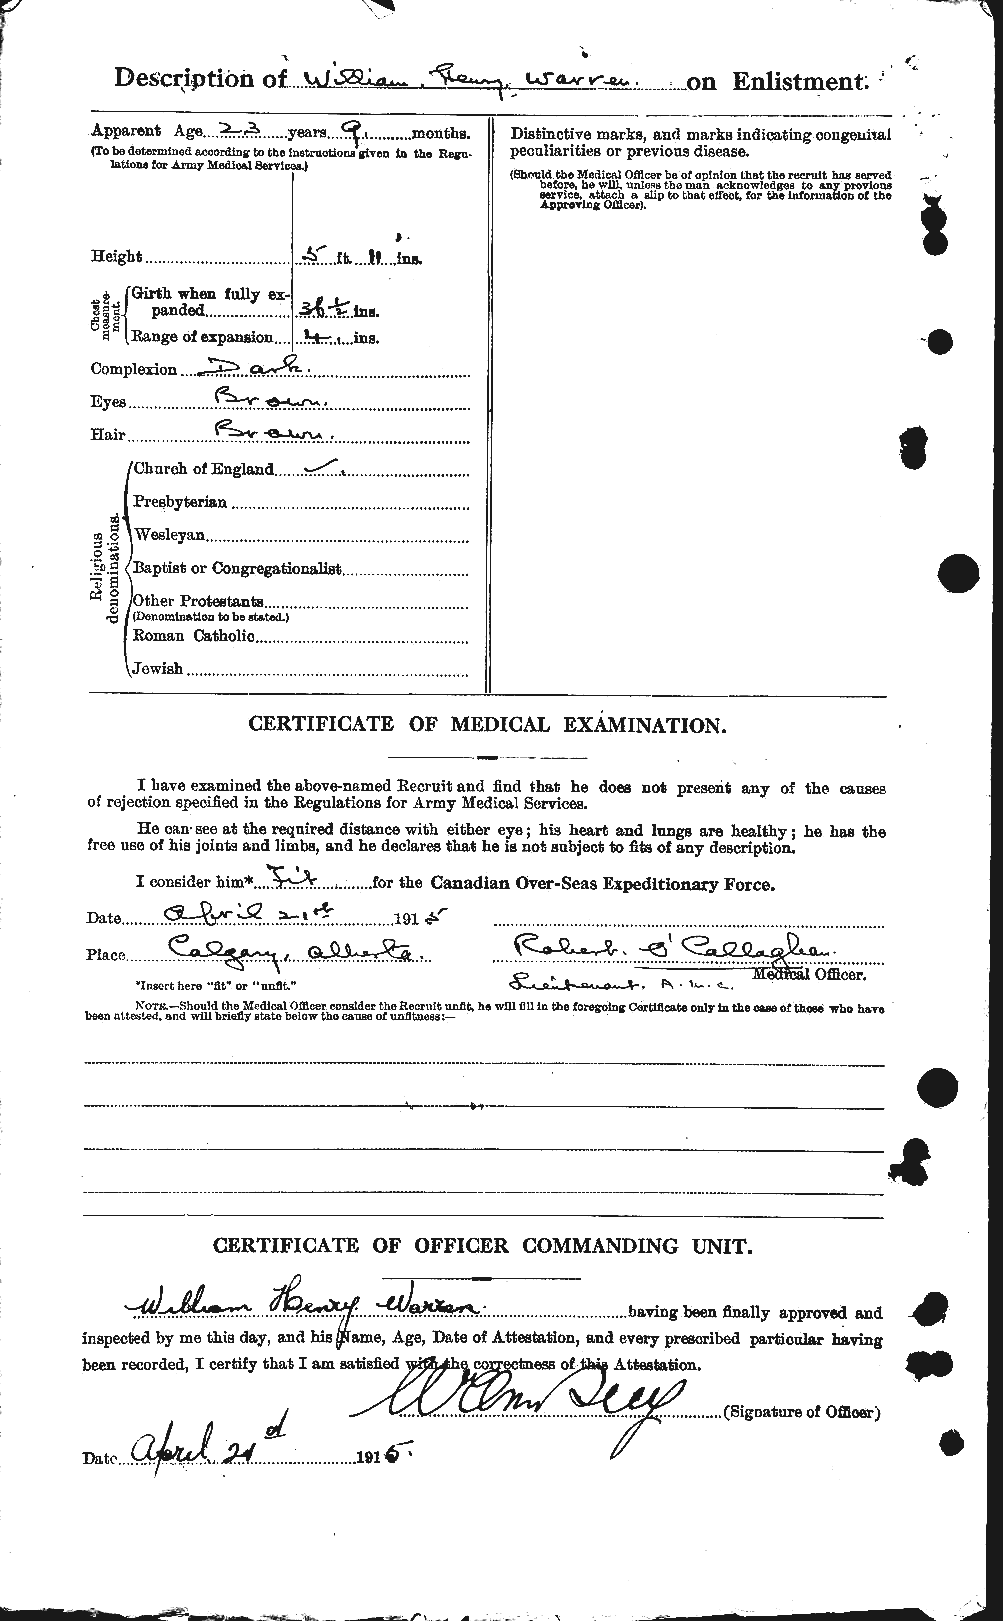 Personnel Records of the First World War - CEF 658688b